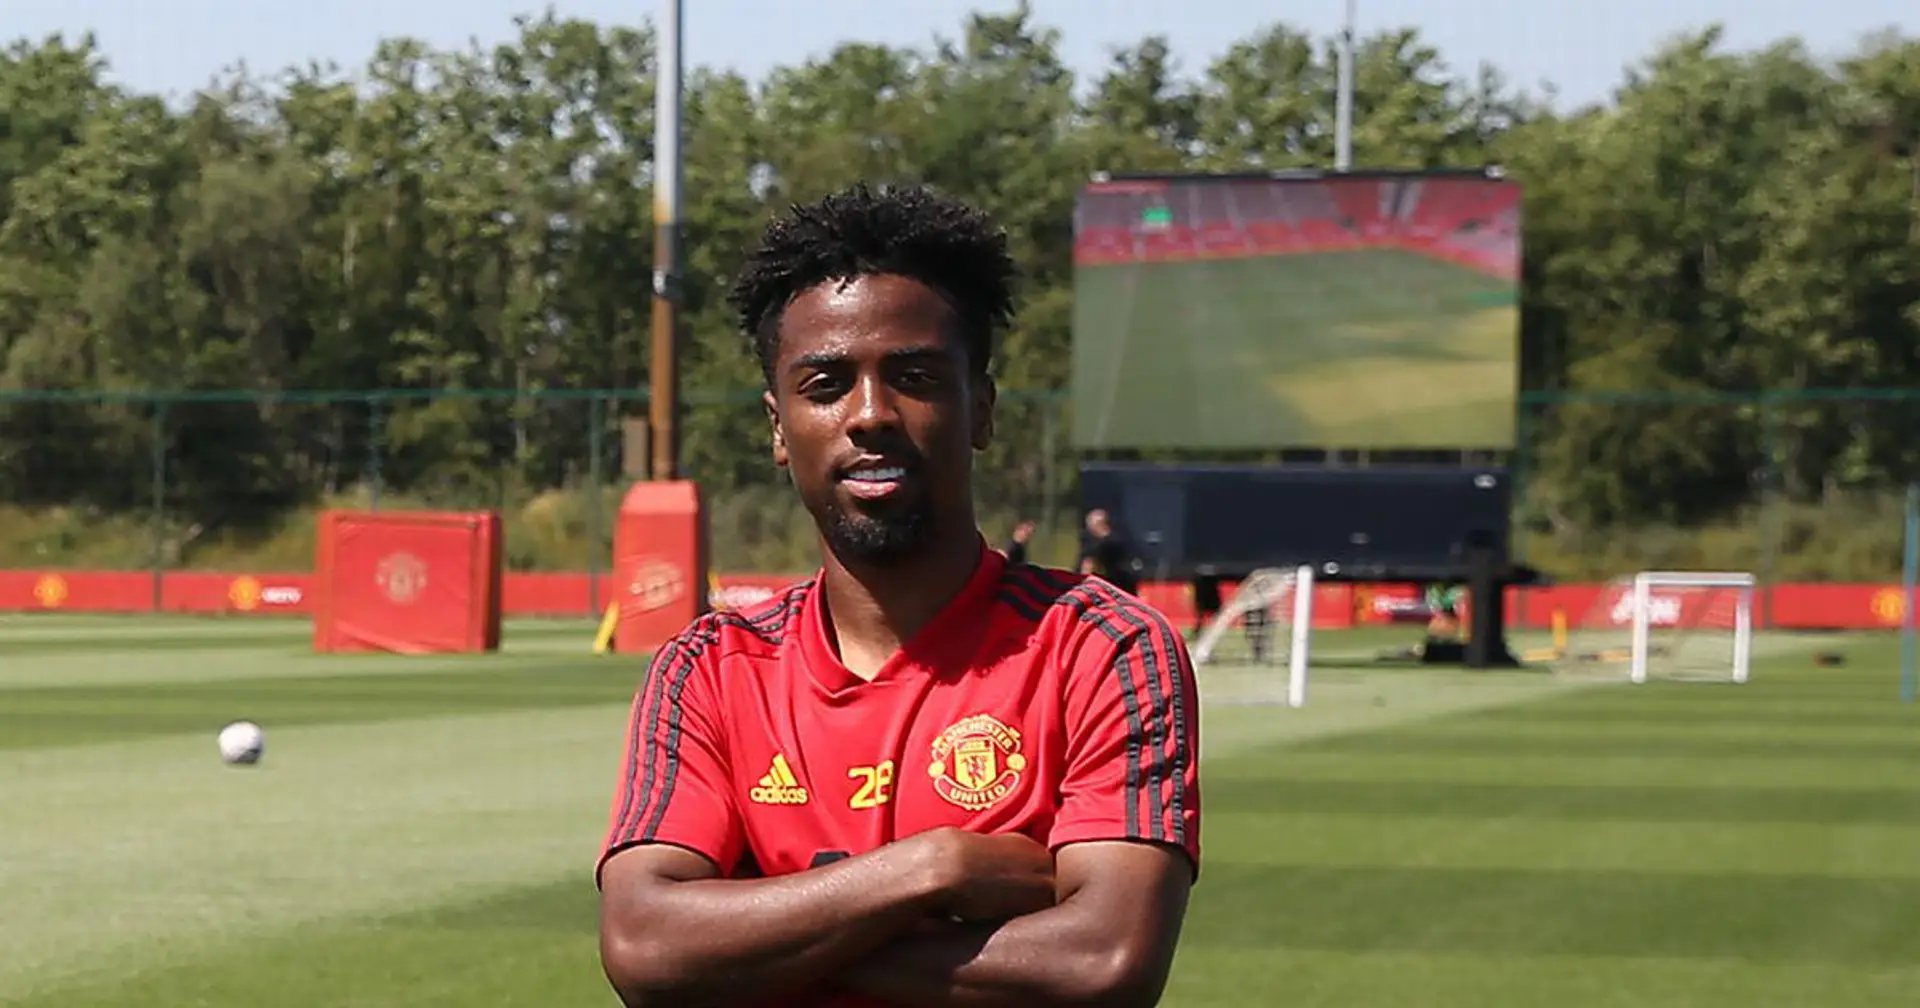 The Telegraph: Angel Gomes ready to stay in Premier League amid Chelsea links